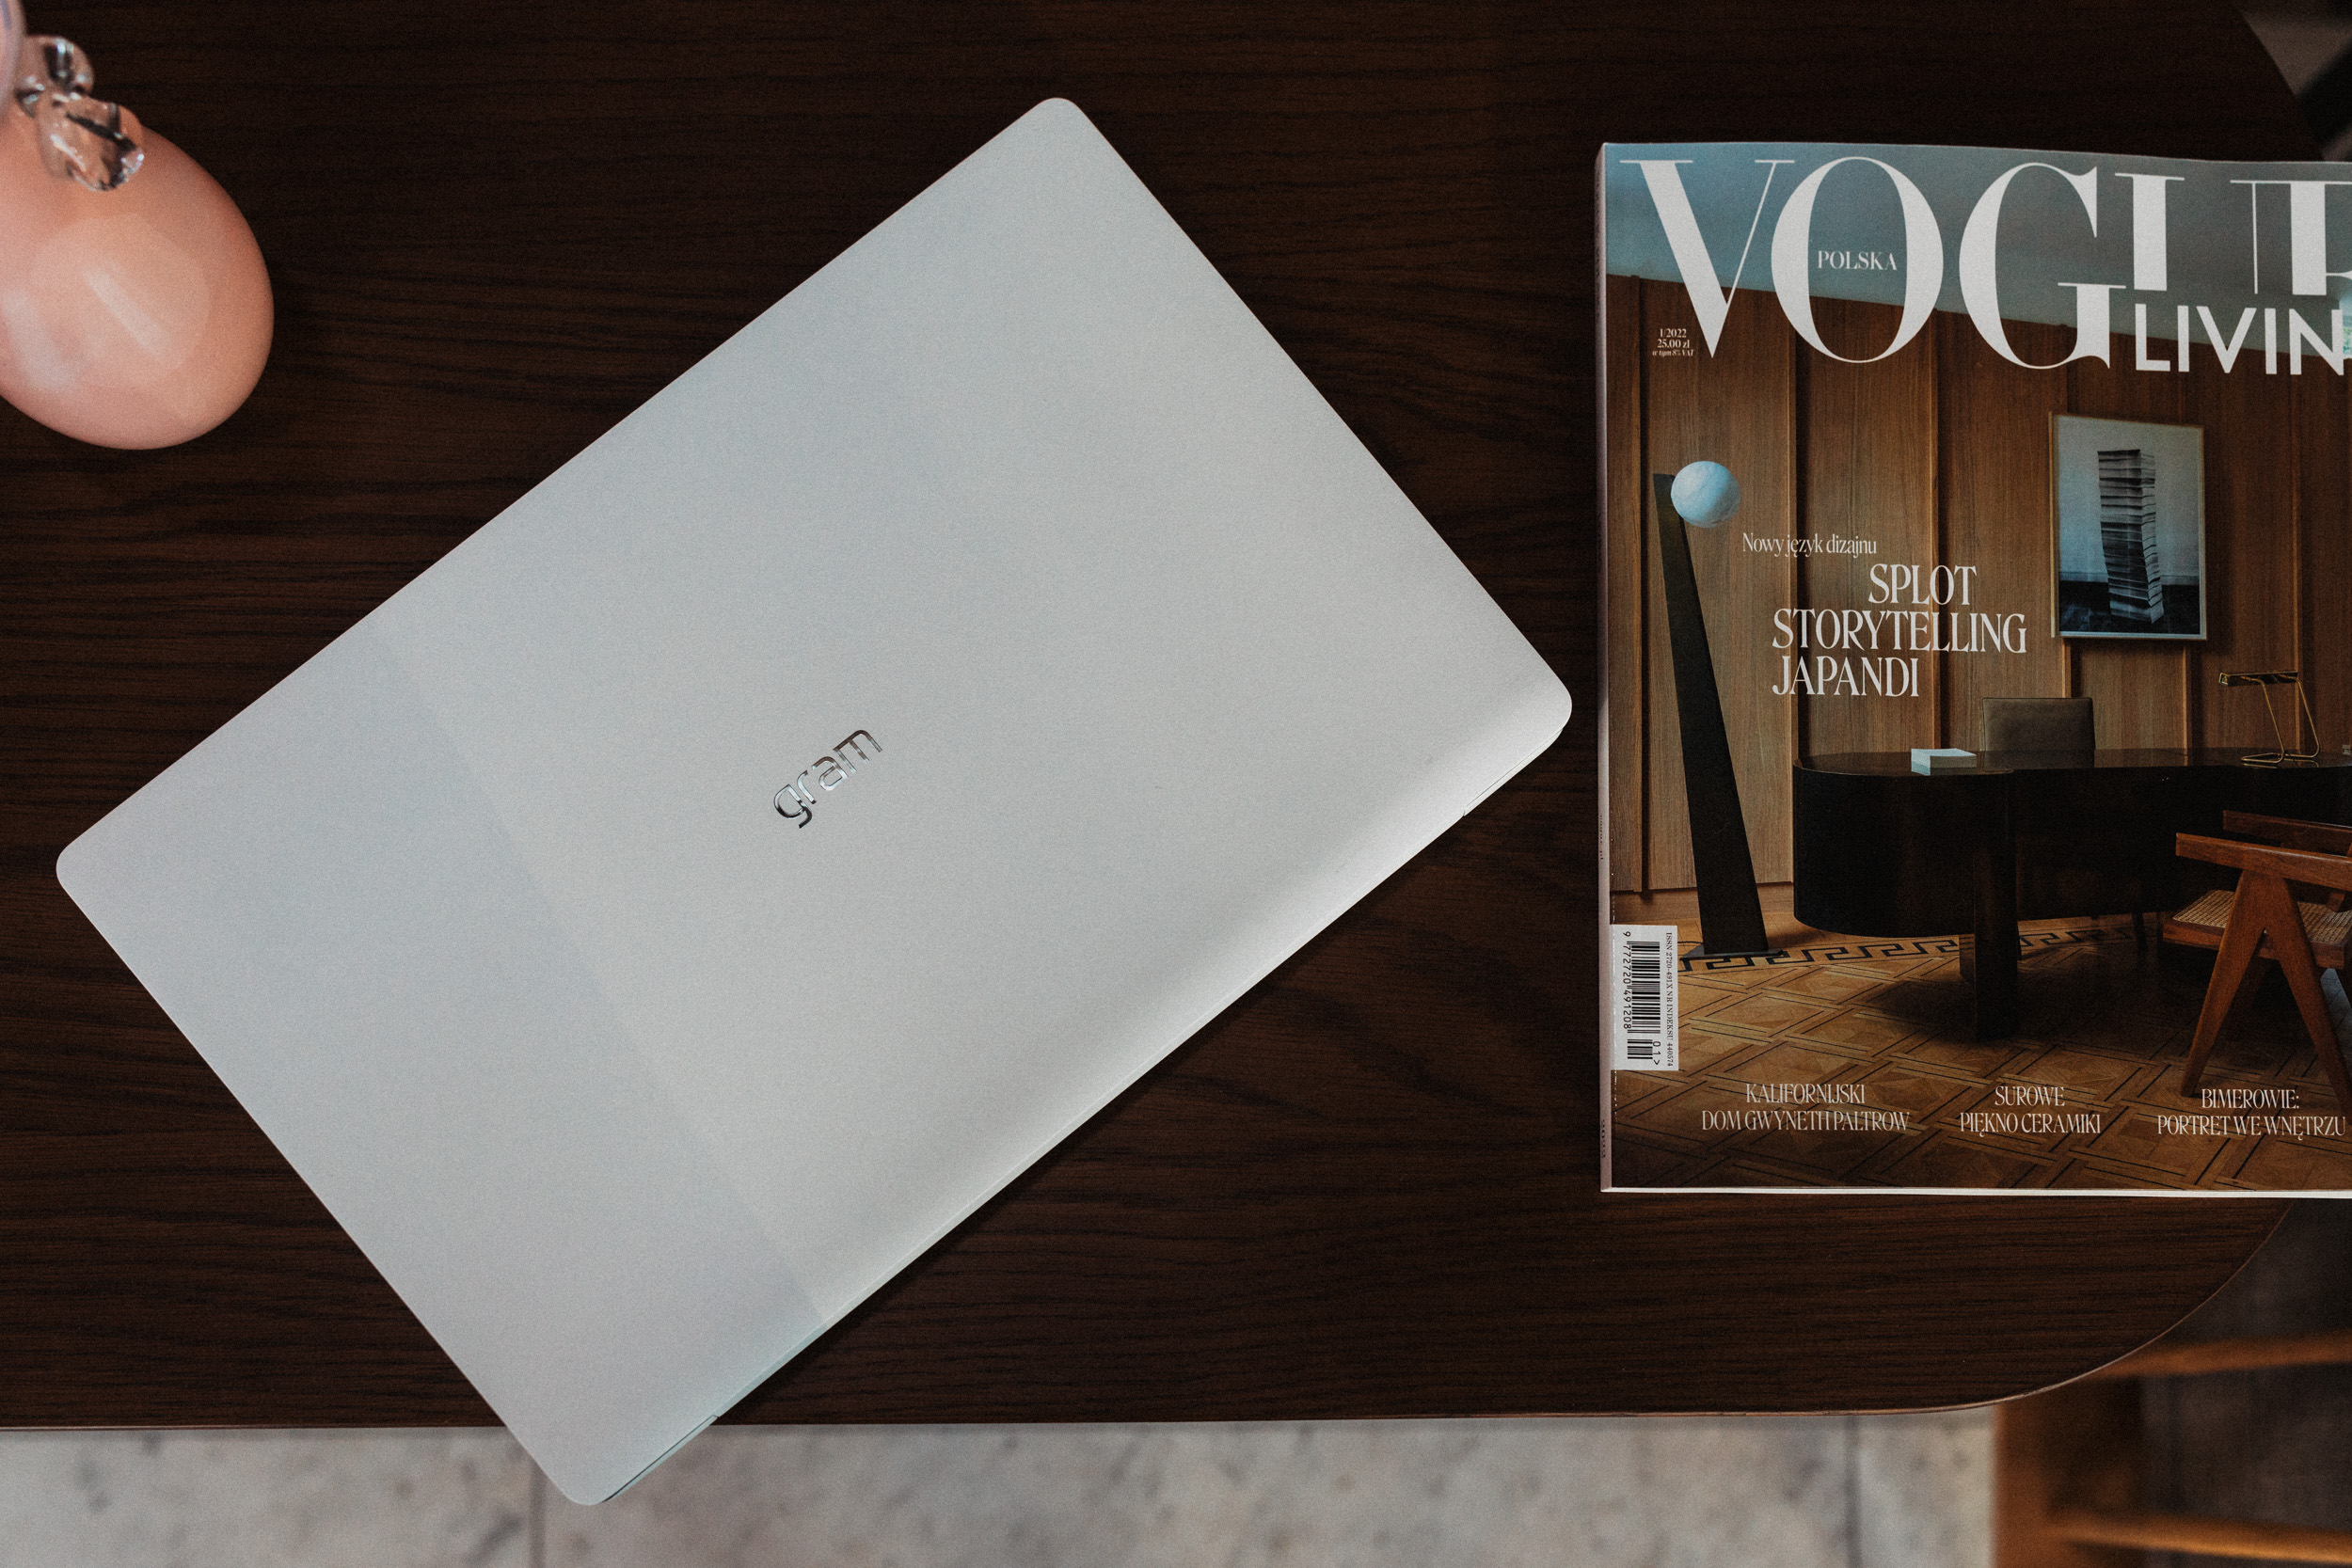 LG gram placed next to the first edition of Vogue Polska magazine